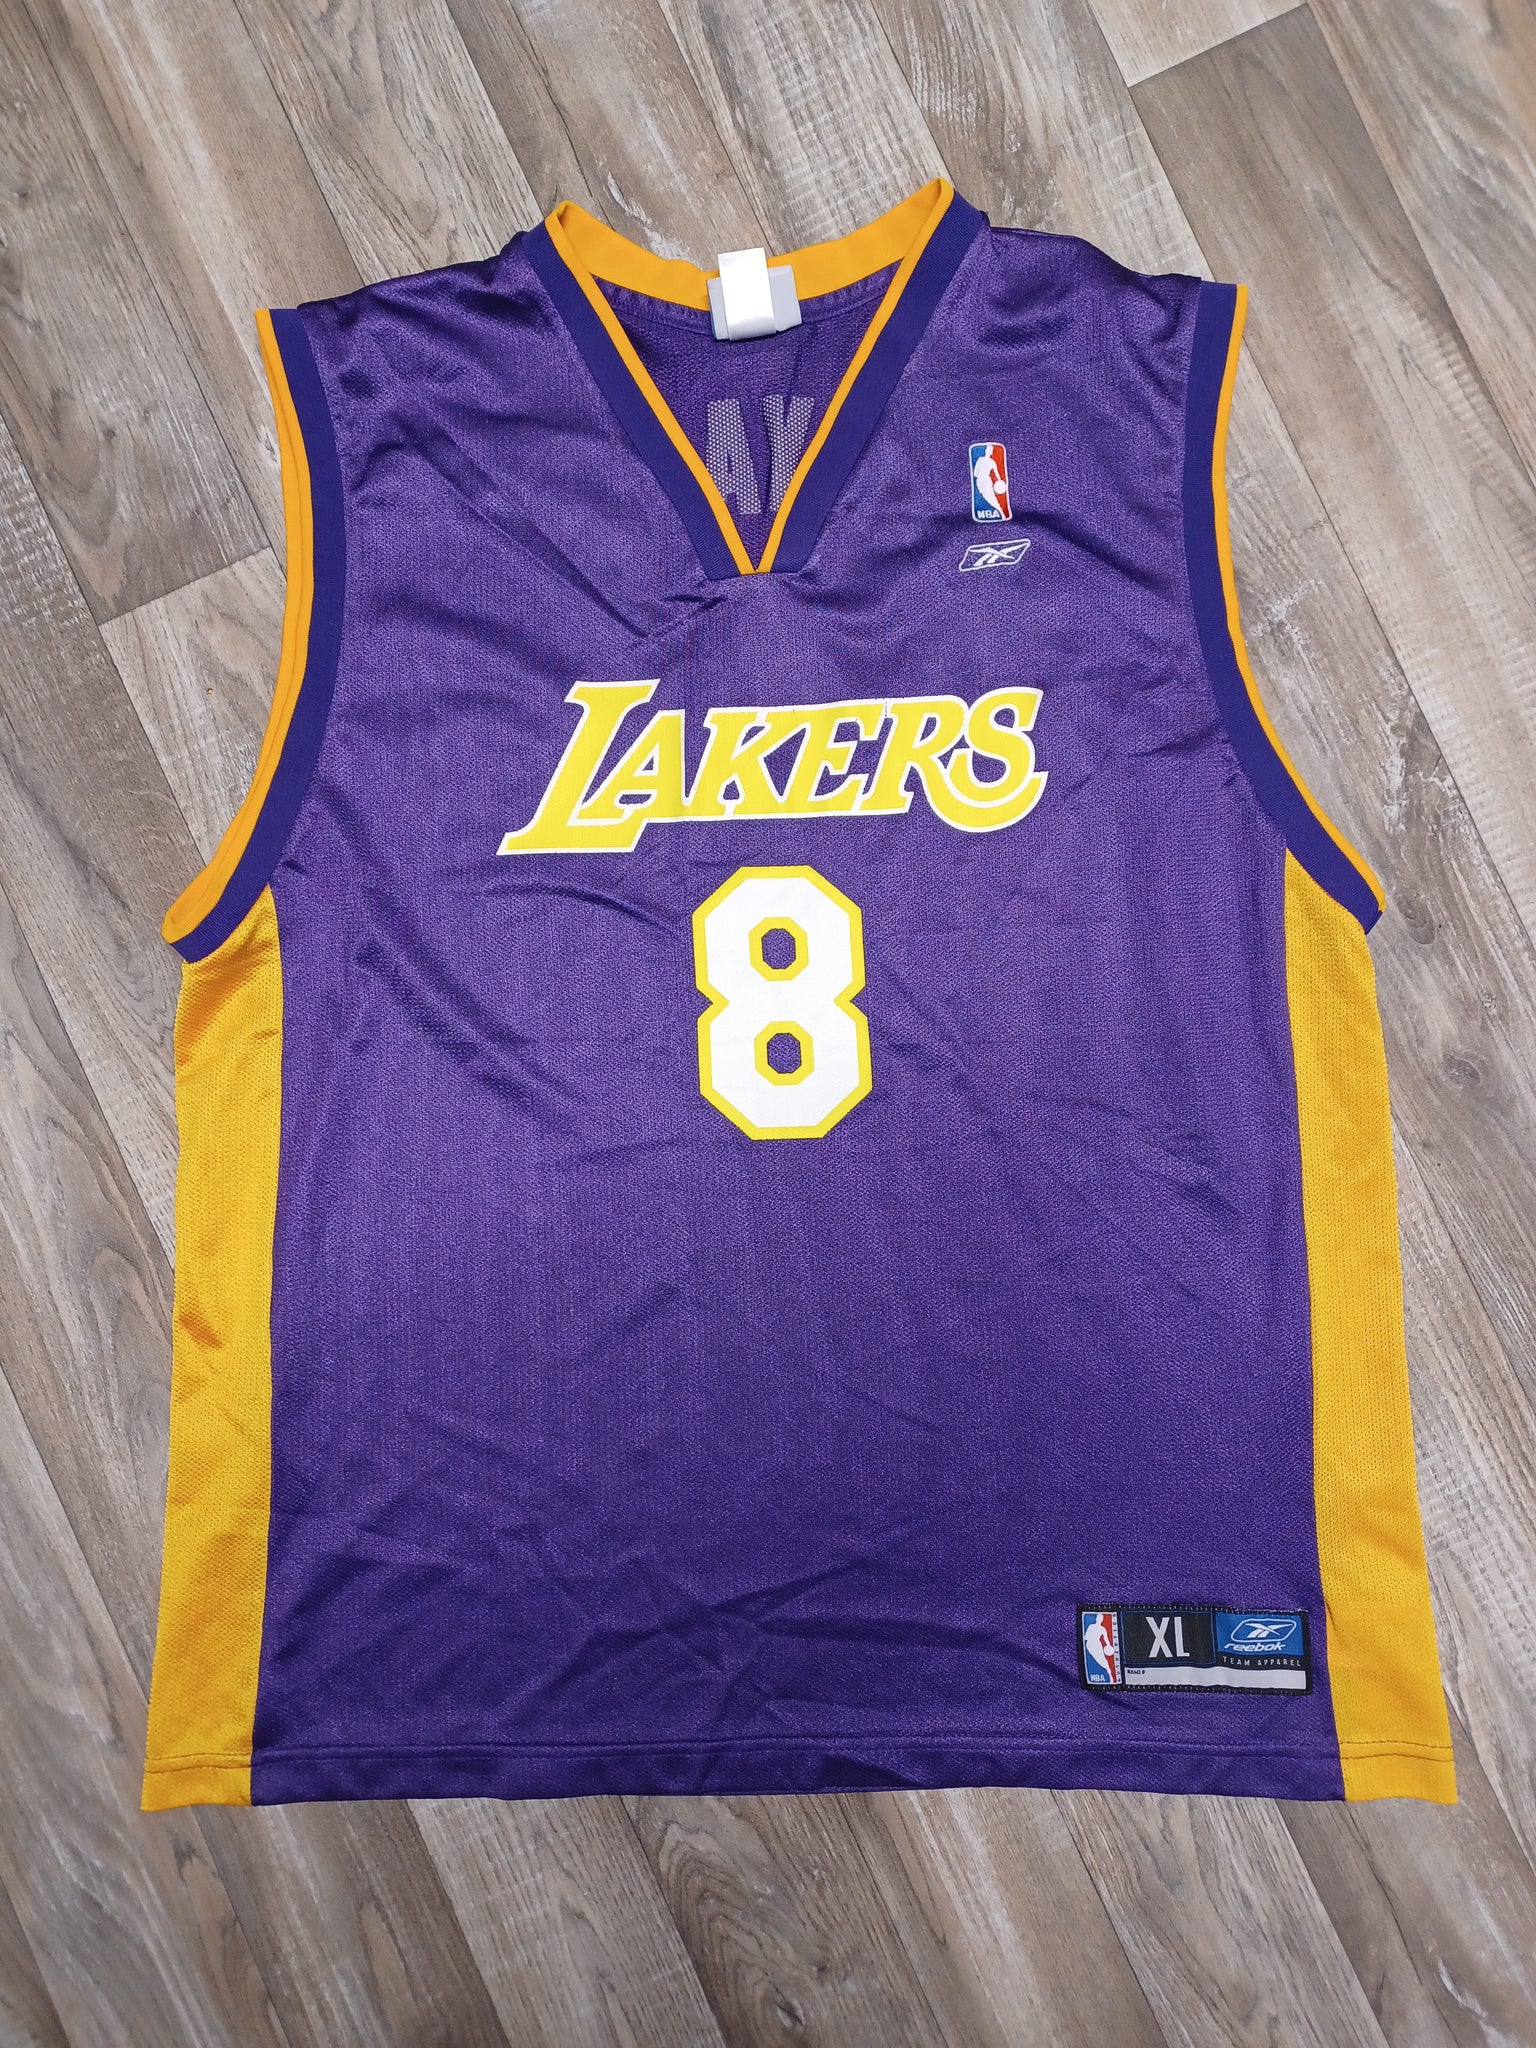 🏀 Kobe Bryant Los Angeles Lakers Jersey Size XL – The Throwback